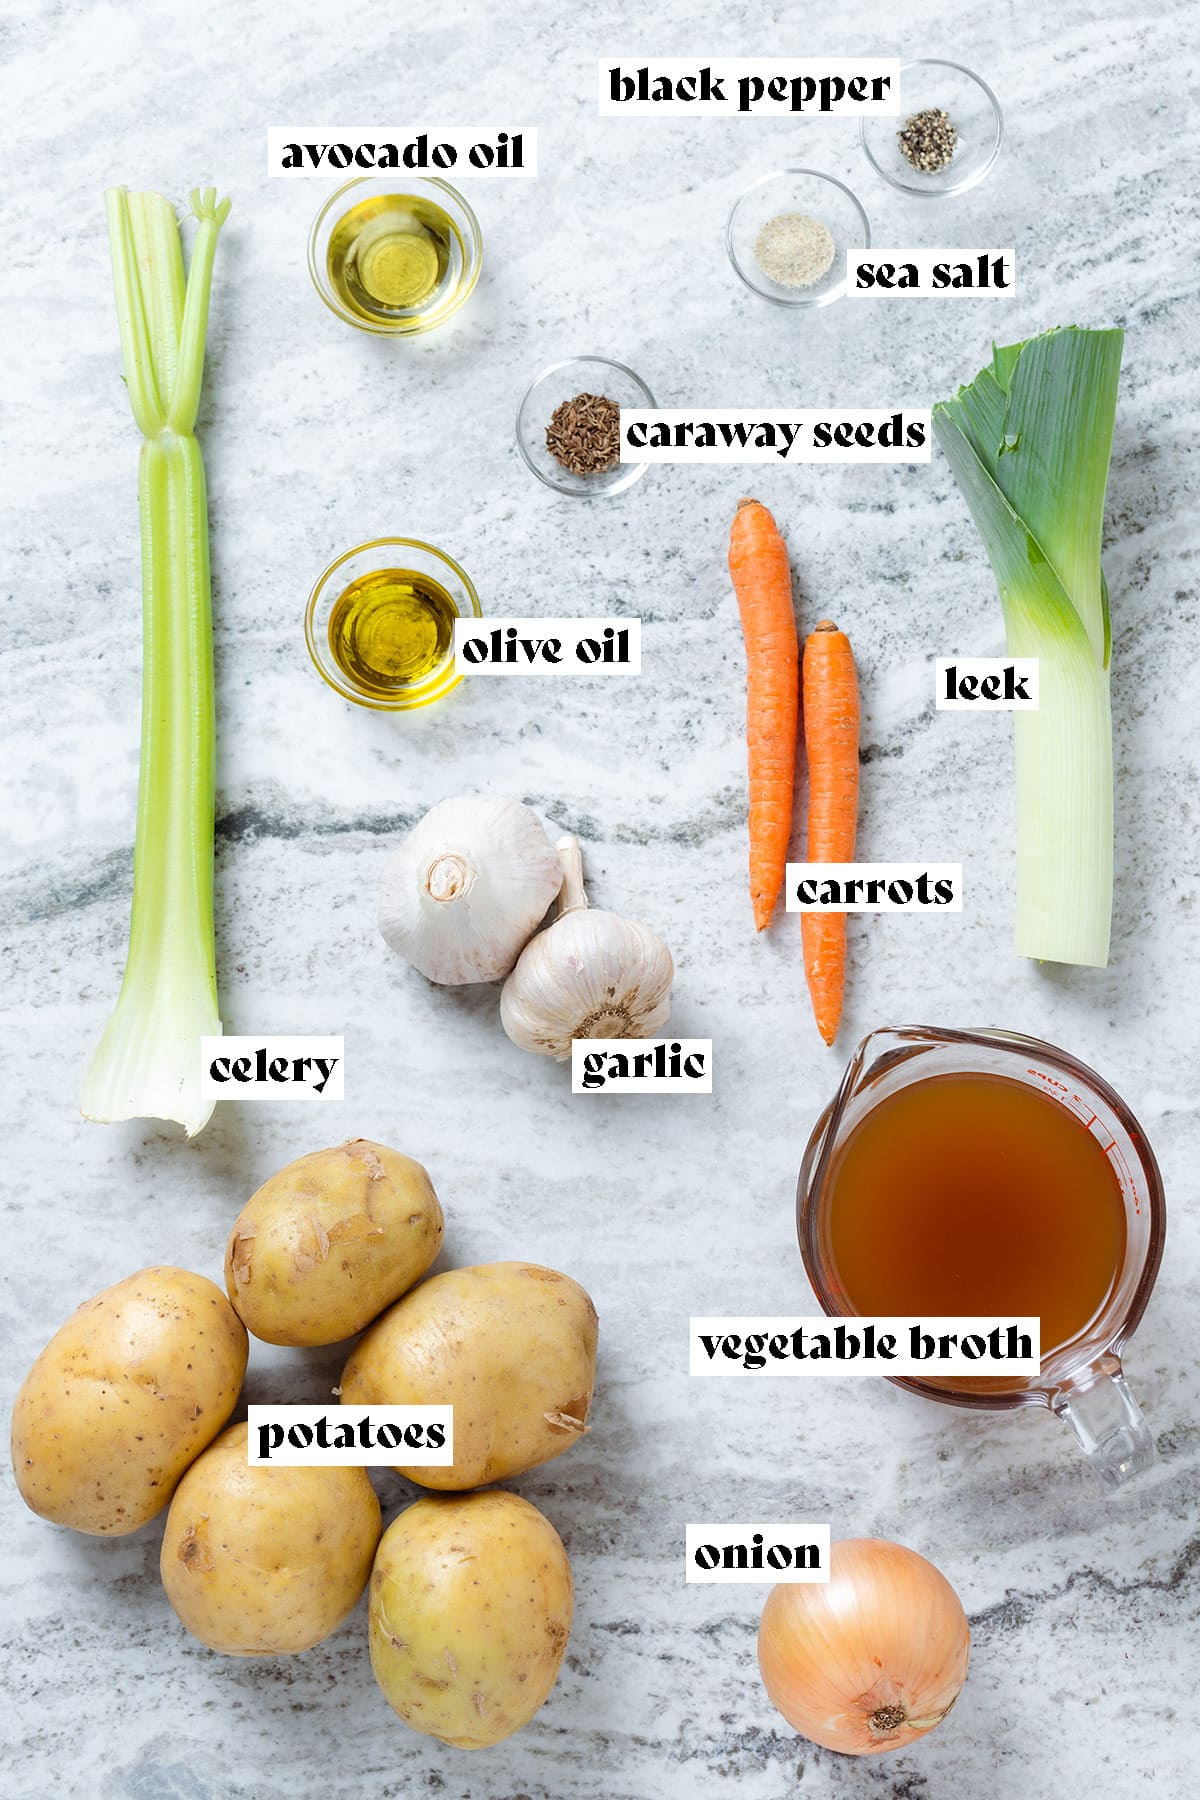 Potatoes, celery, carrots, vegetable broth, and other ingredients laid out on a stone background with text overlay.